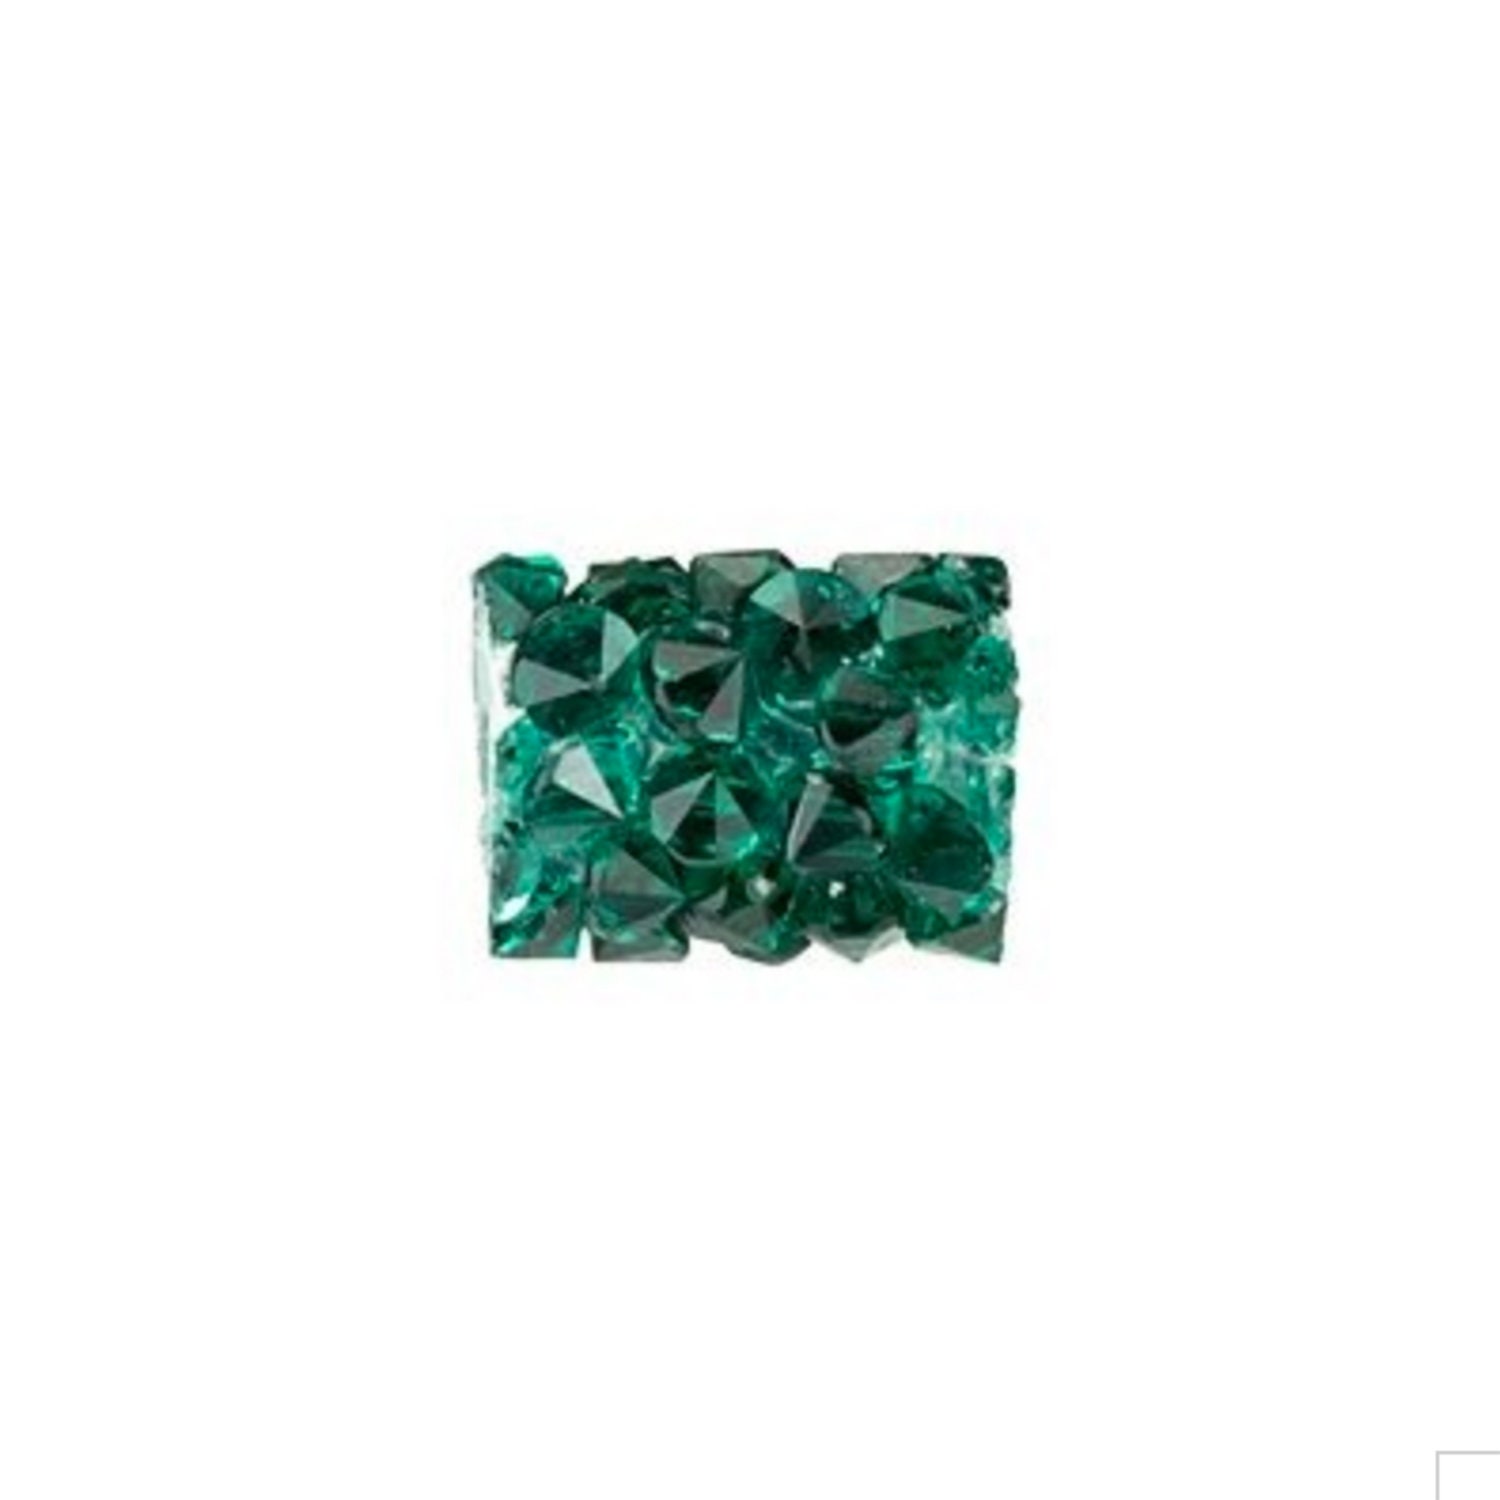 Swarovski Crystals Bead Jewelry Supplies • Hidden Jewel of the South End